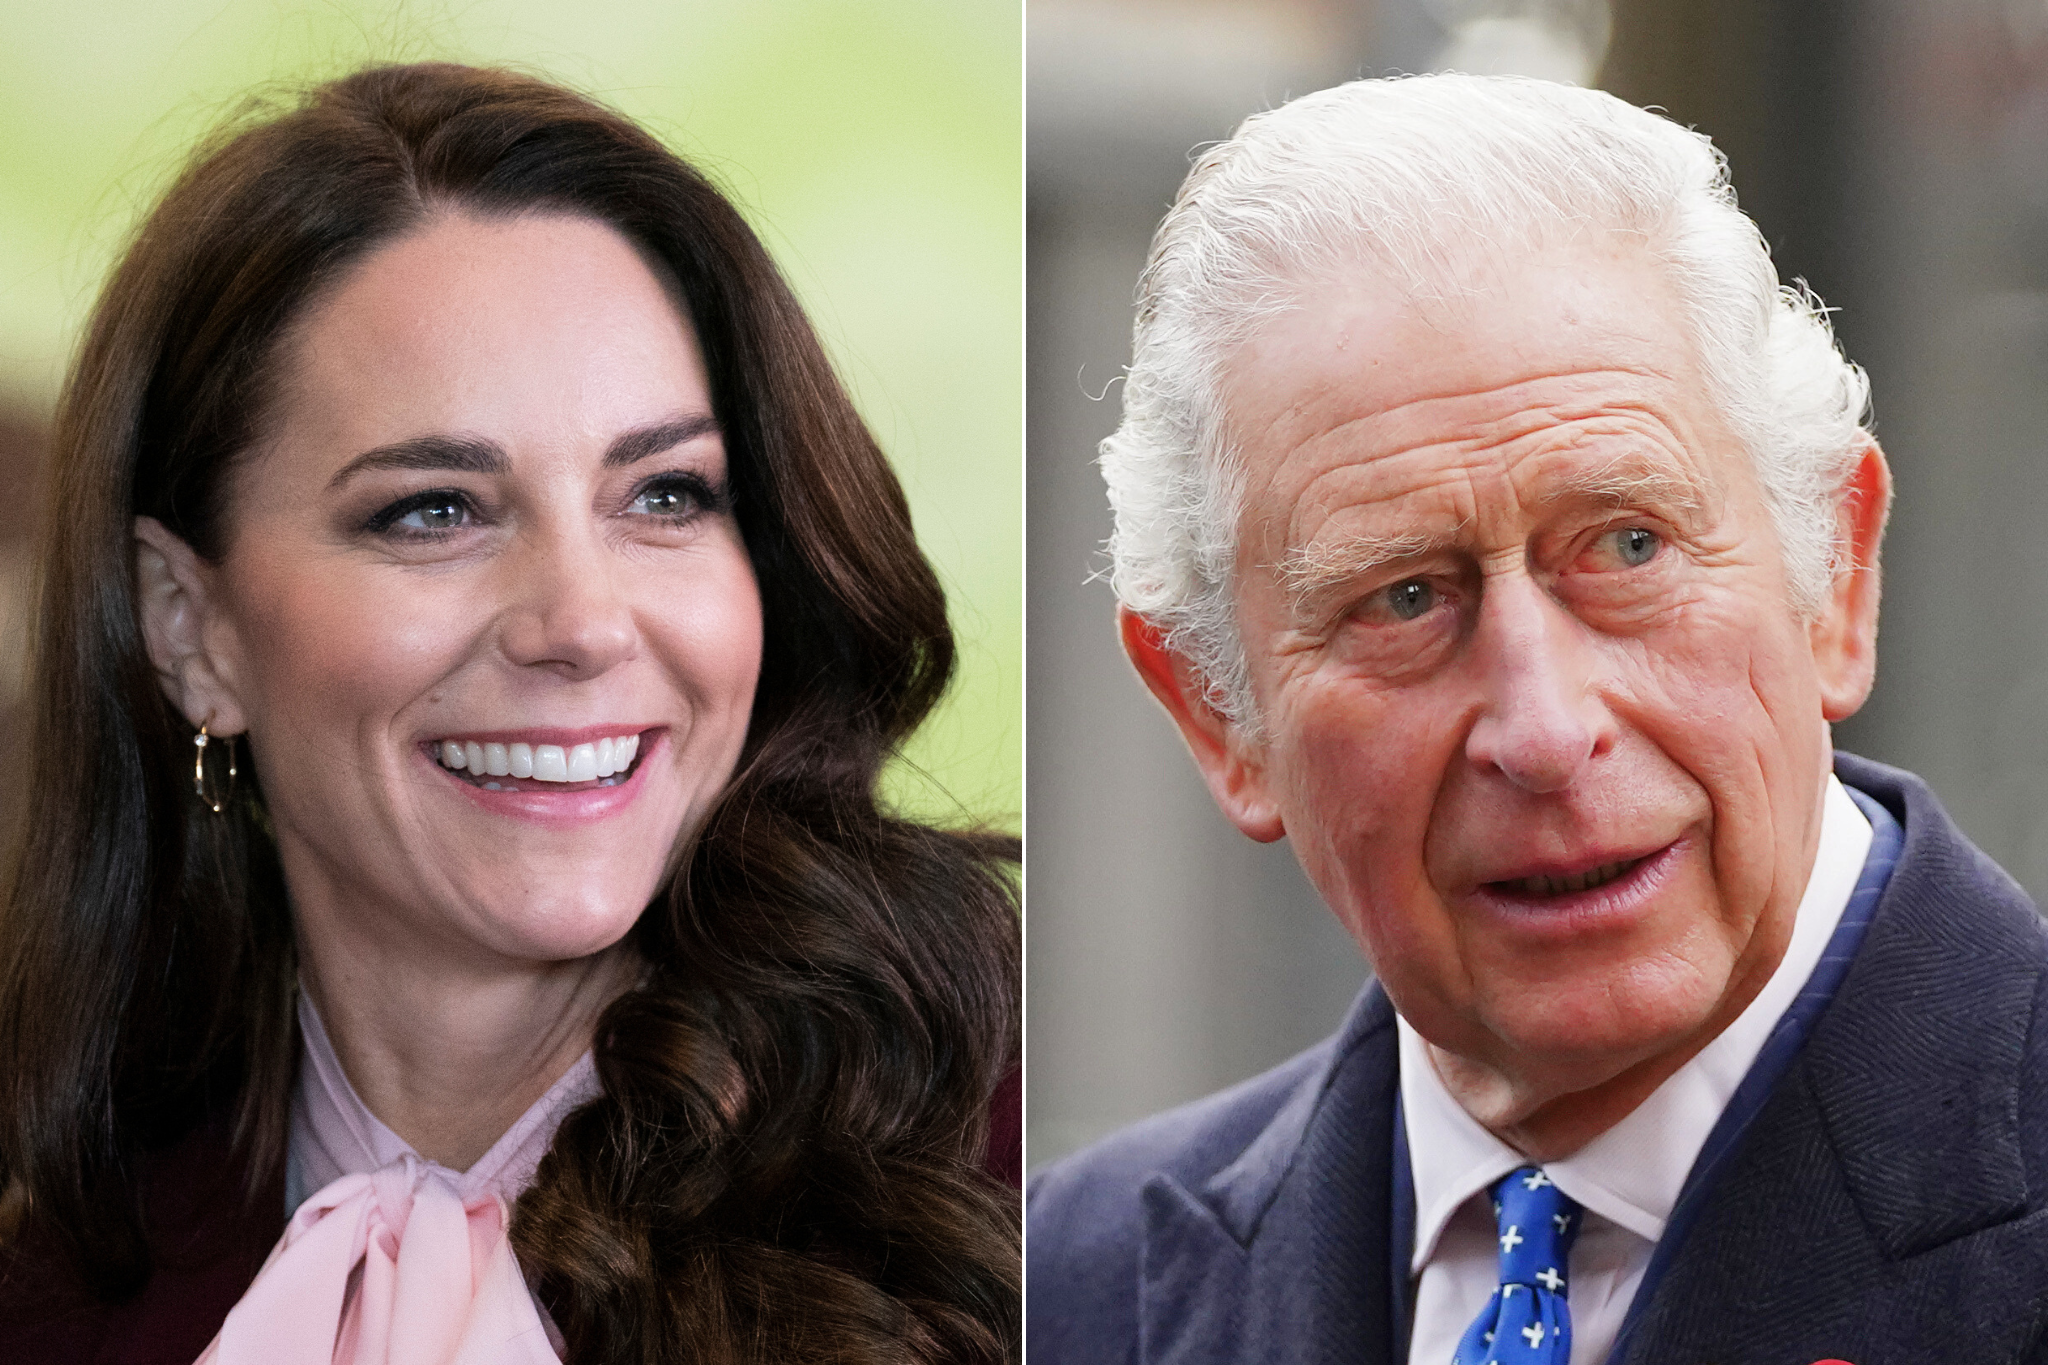 King Charles and Kate Middleton will appear together at the Trooping the Color parade